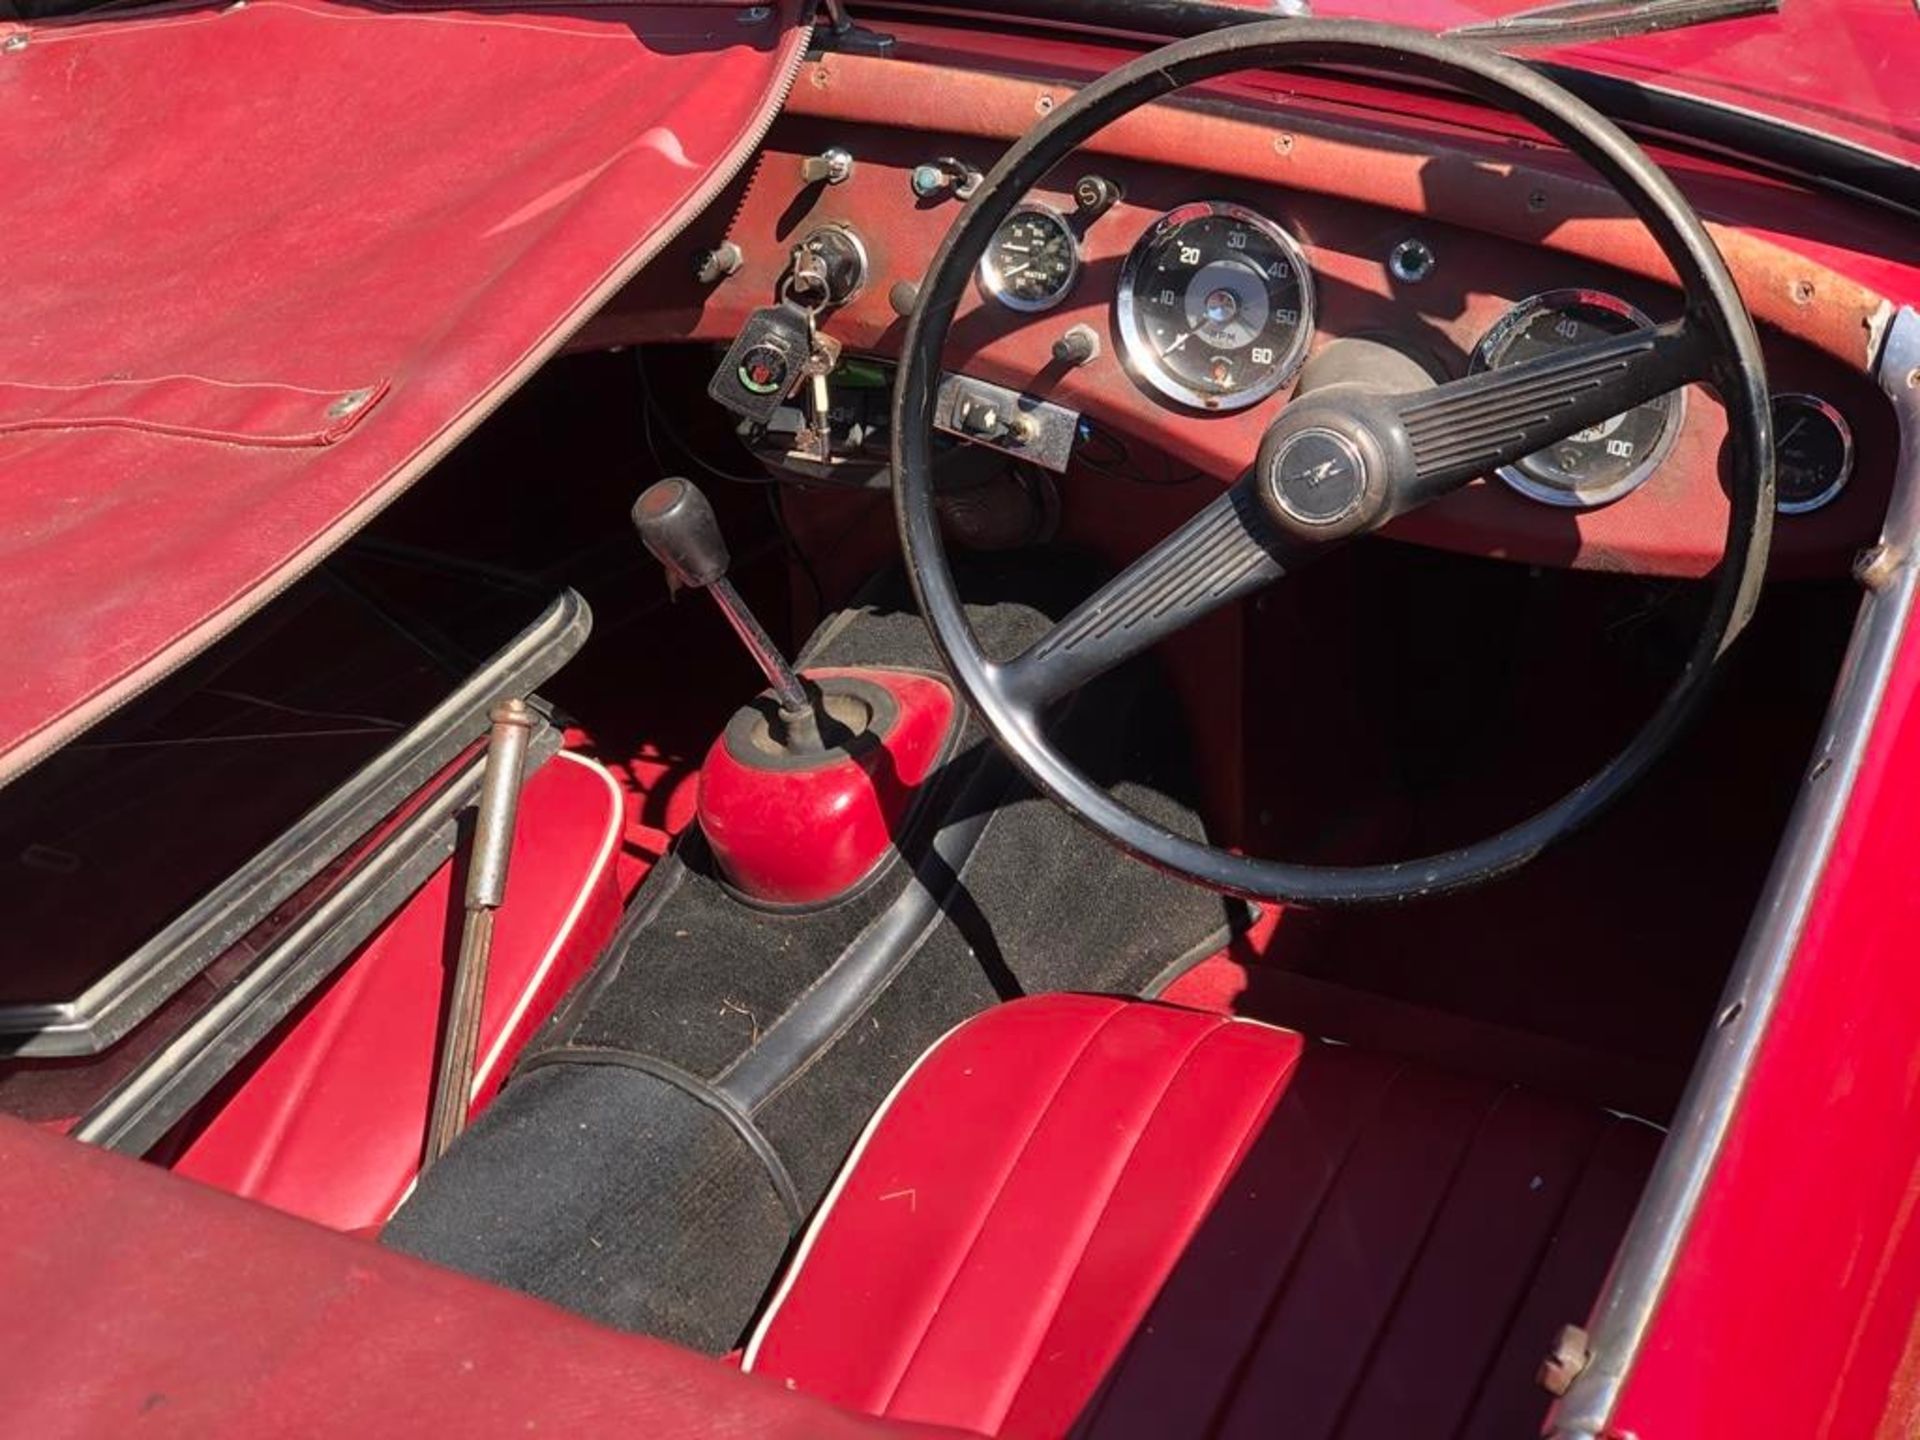 1959 Austin Healey Frogeye Sprite Registration number 502 BDV Cherry red, the interior red piped - Image 27 of 33